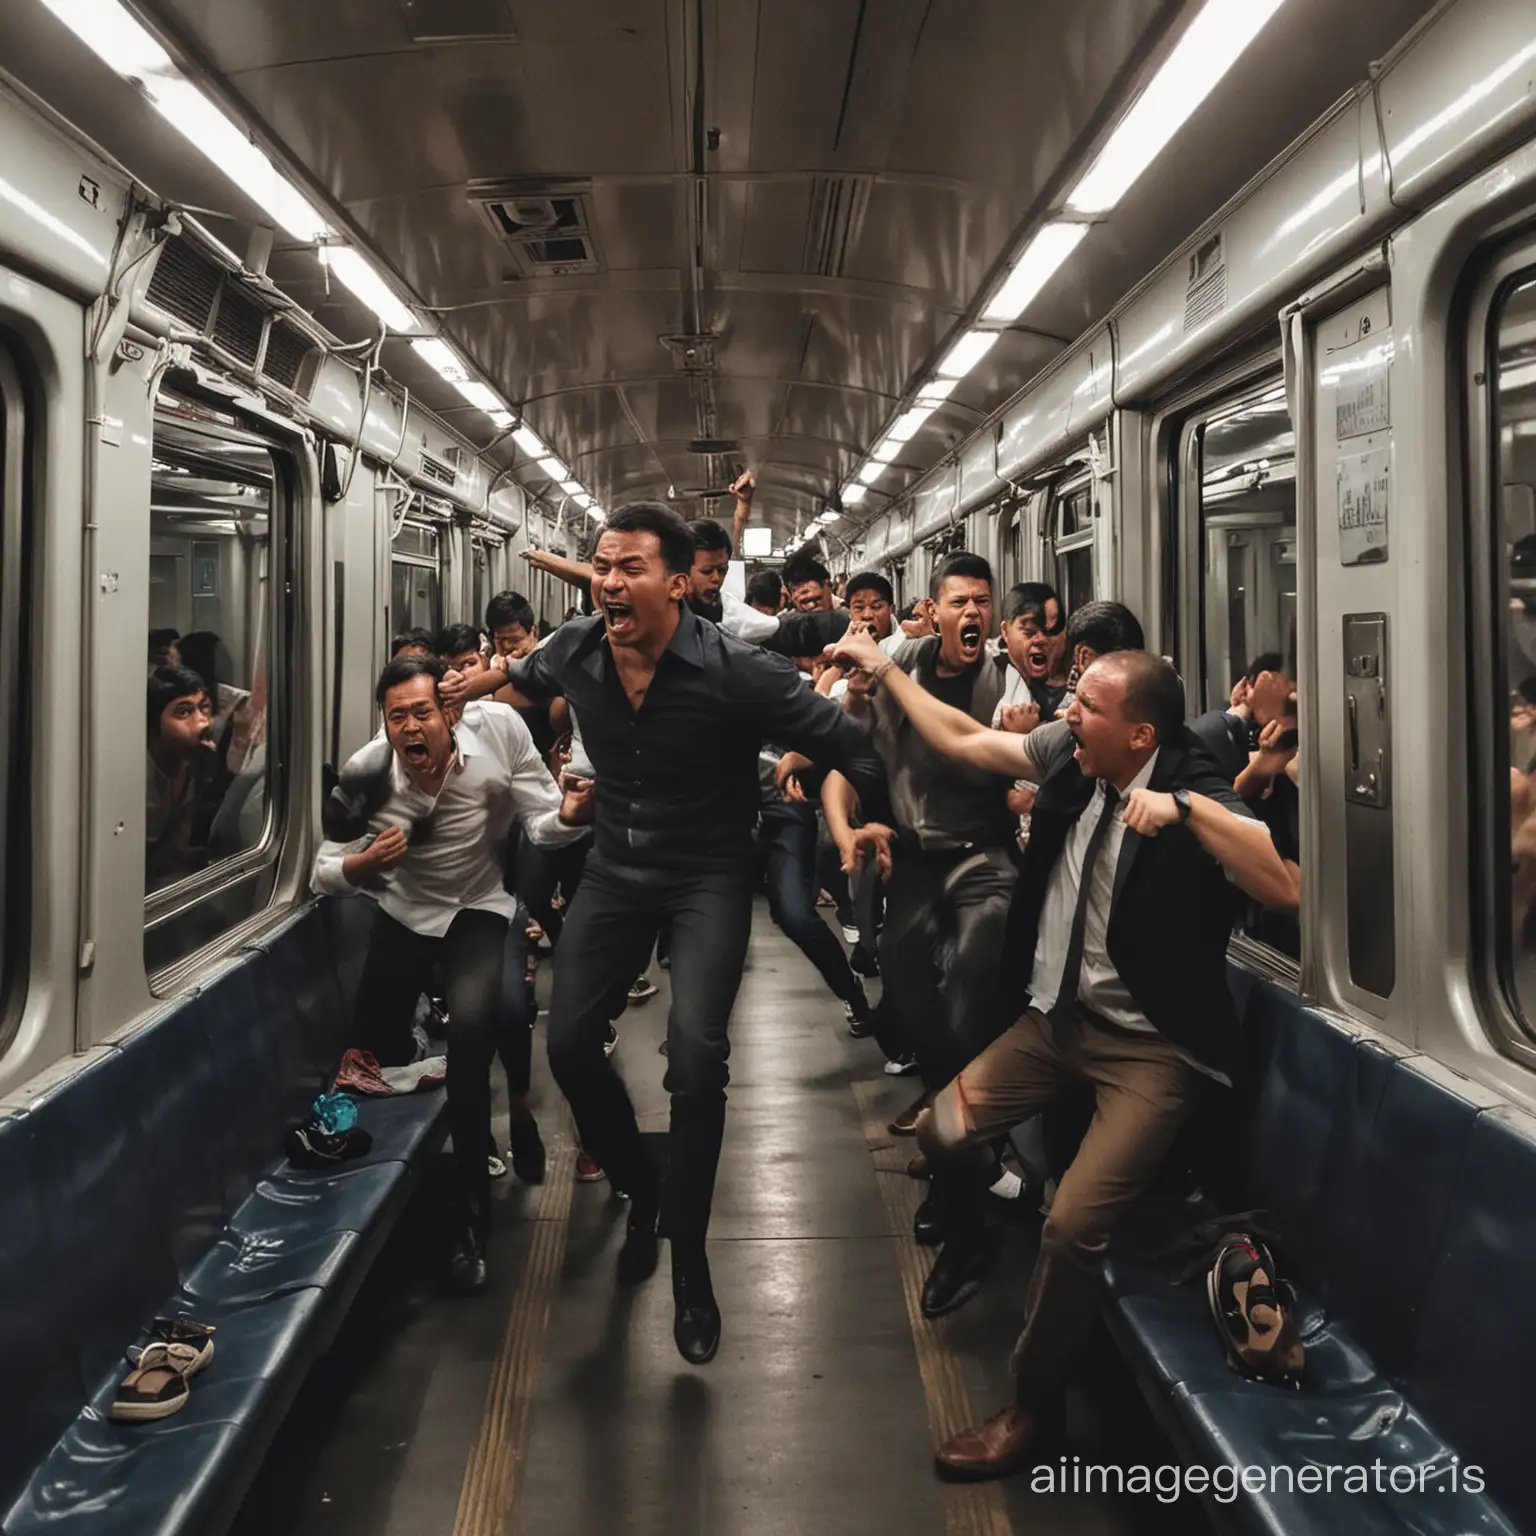 Fight and screaming in the train compartment